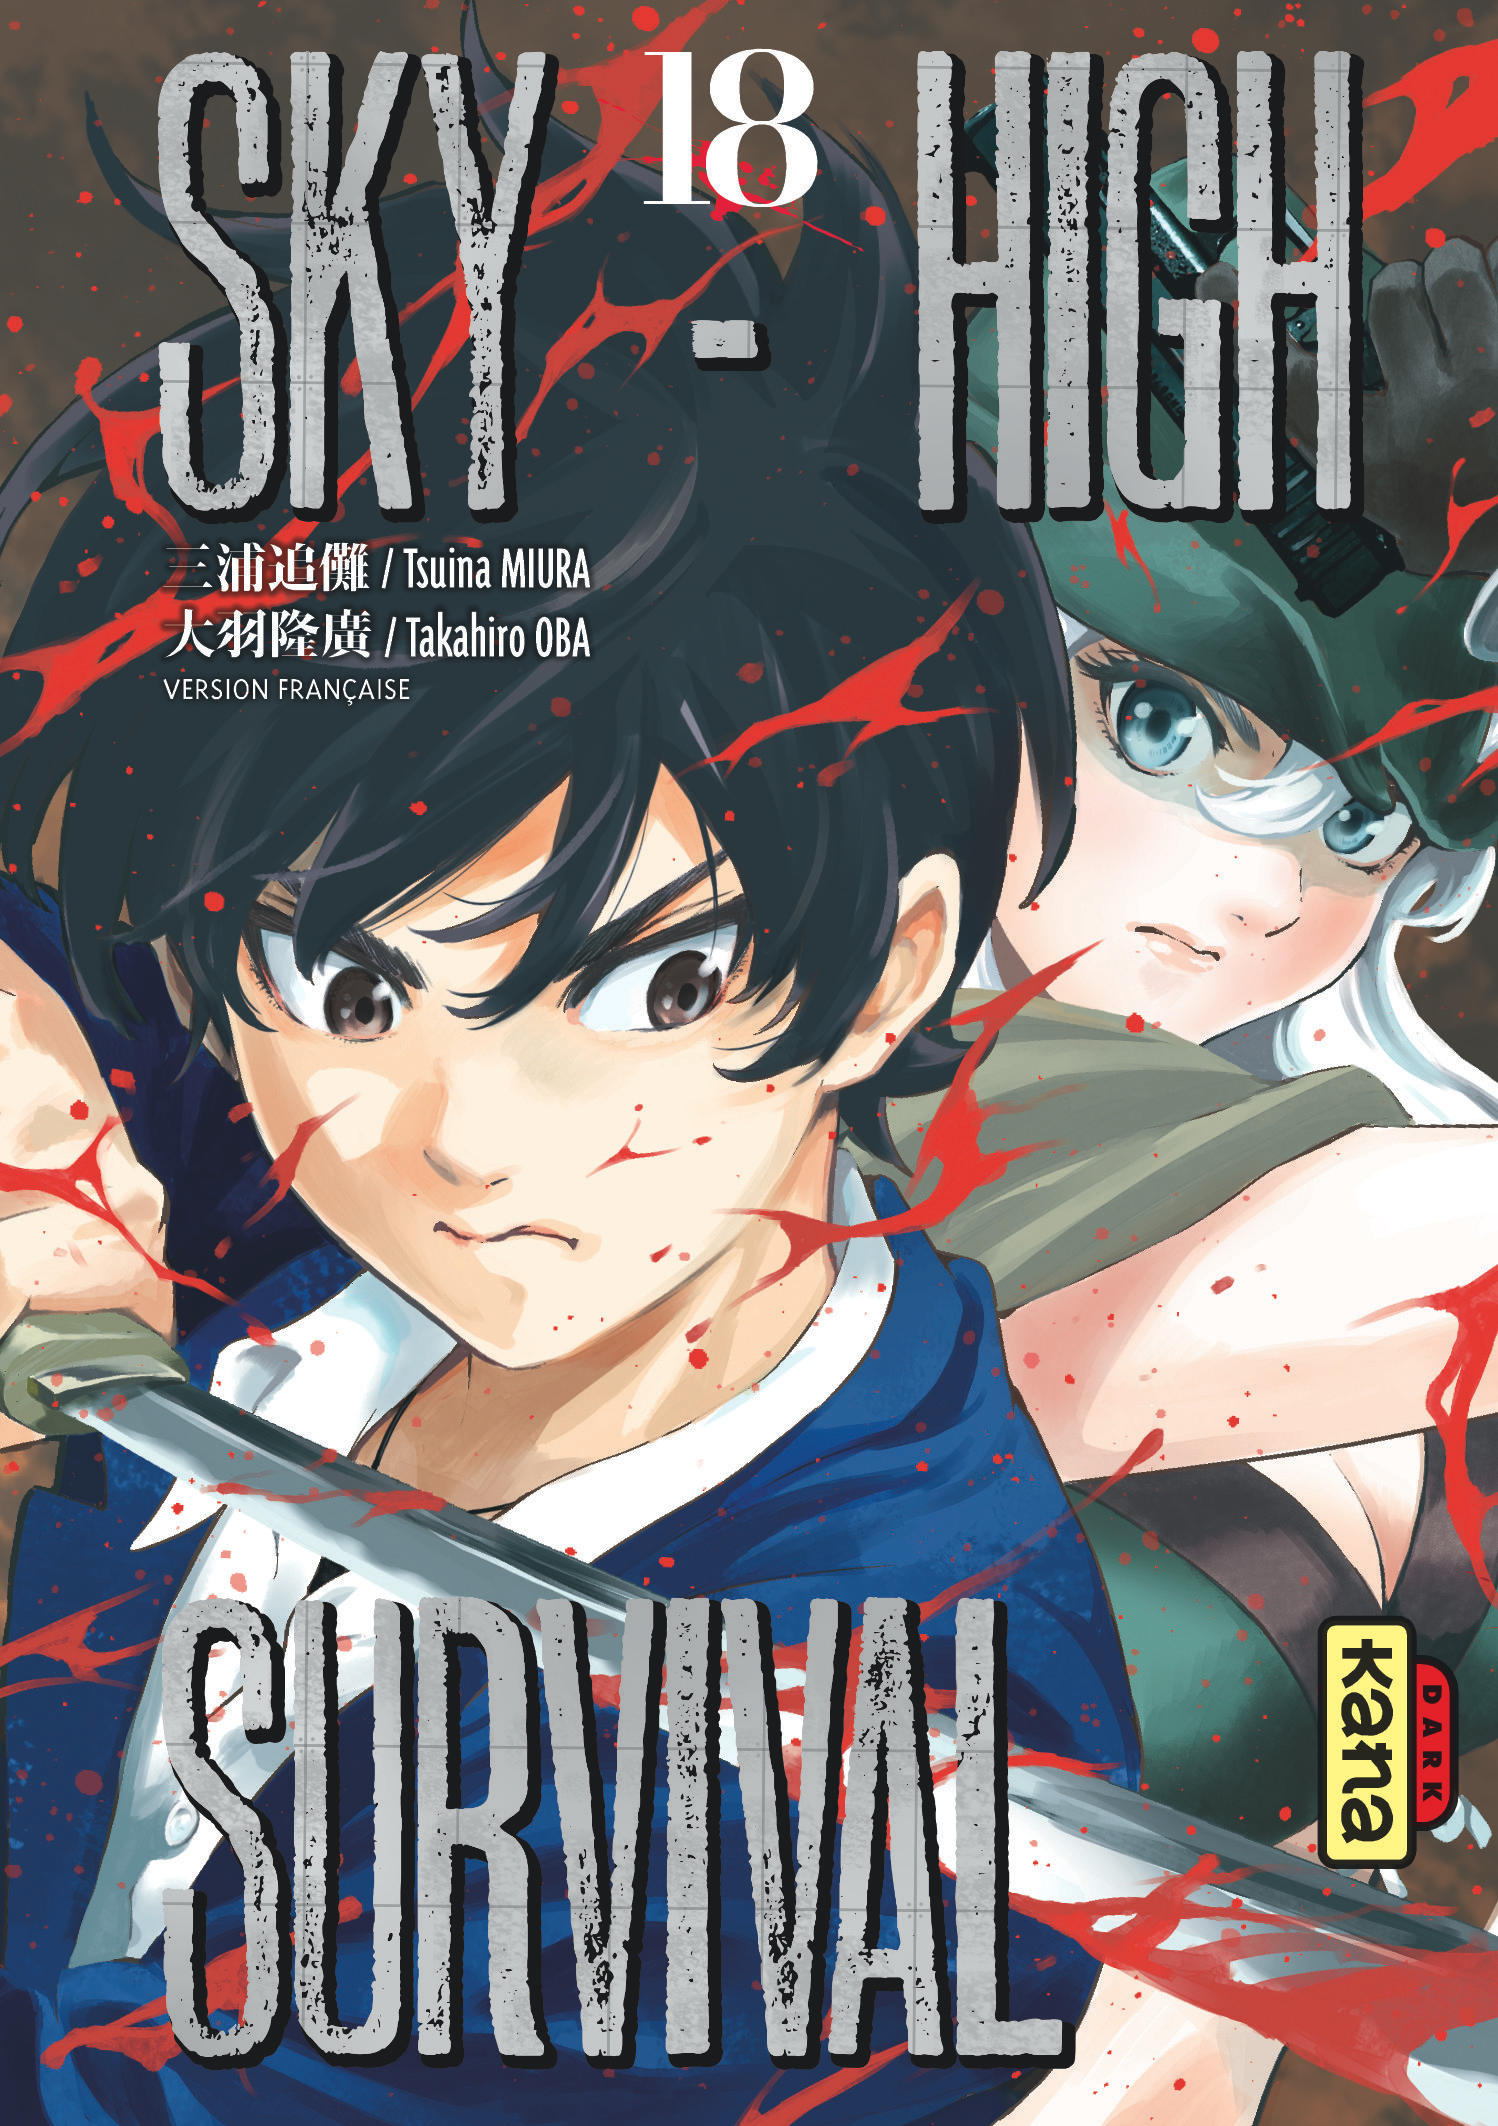 Sky-high survival – Tome 18 - couv